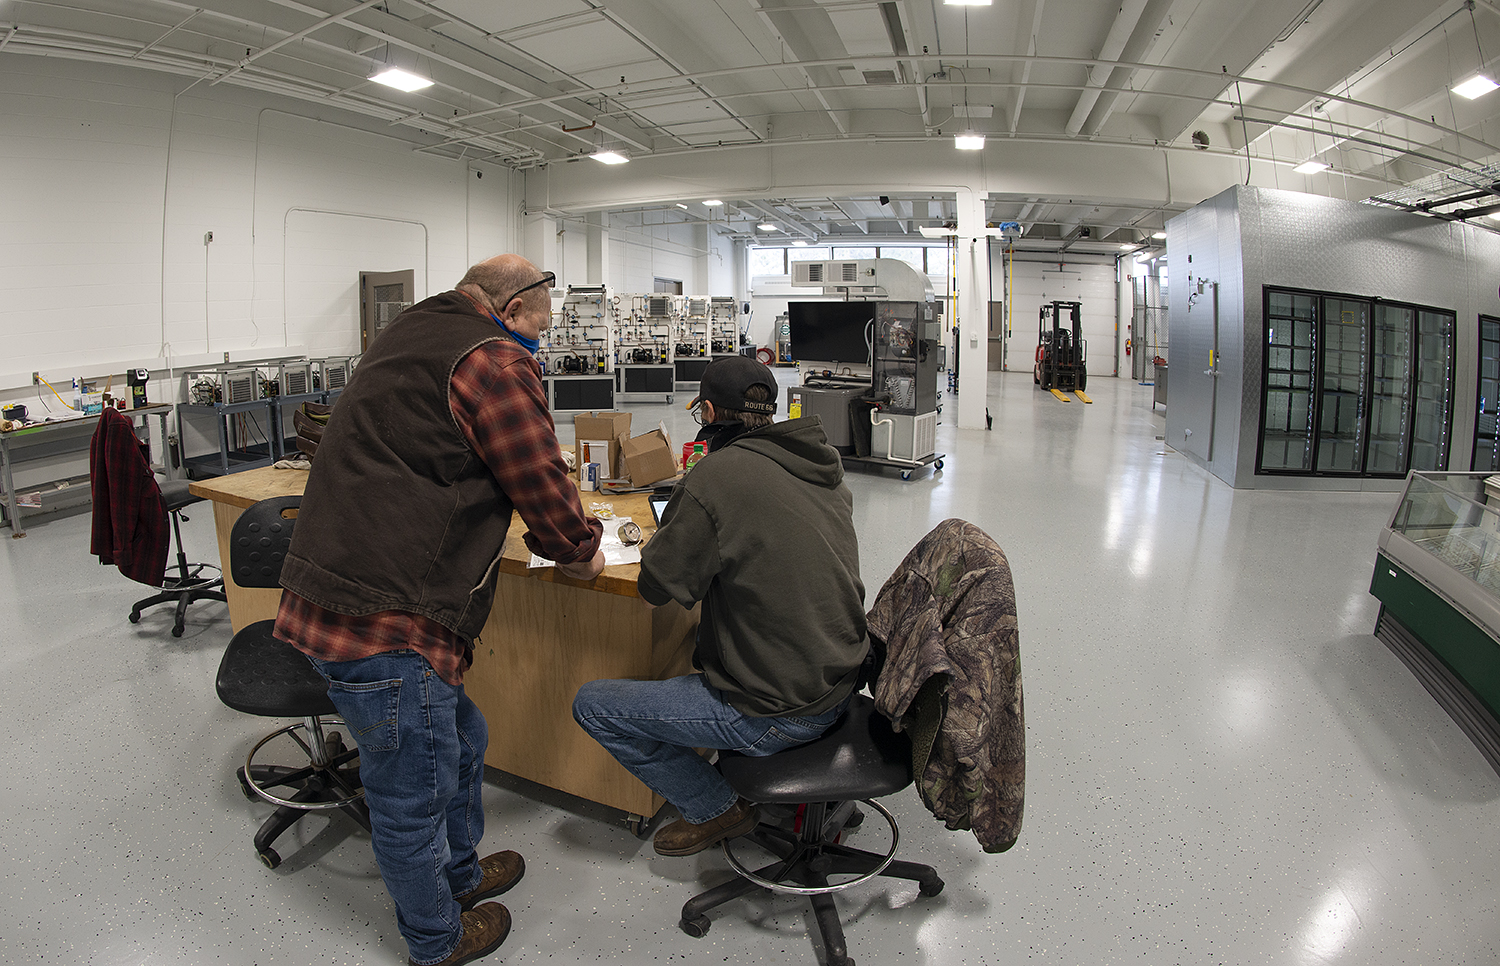 The commercial refrigeration lab at NTC.